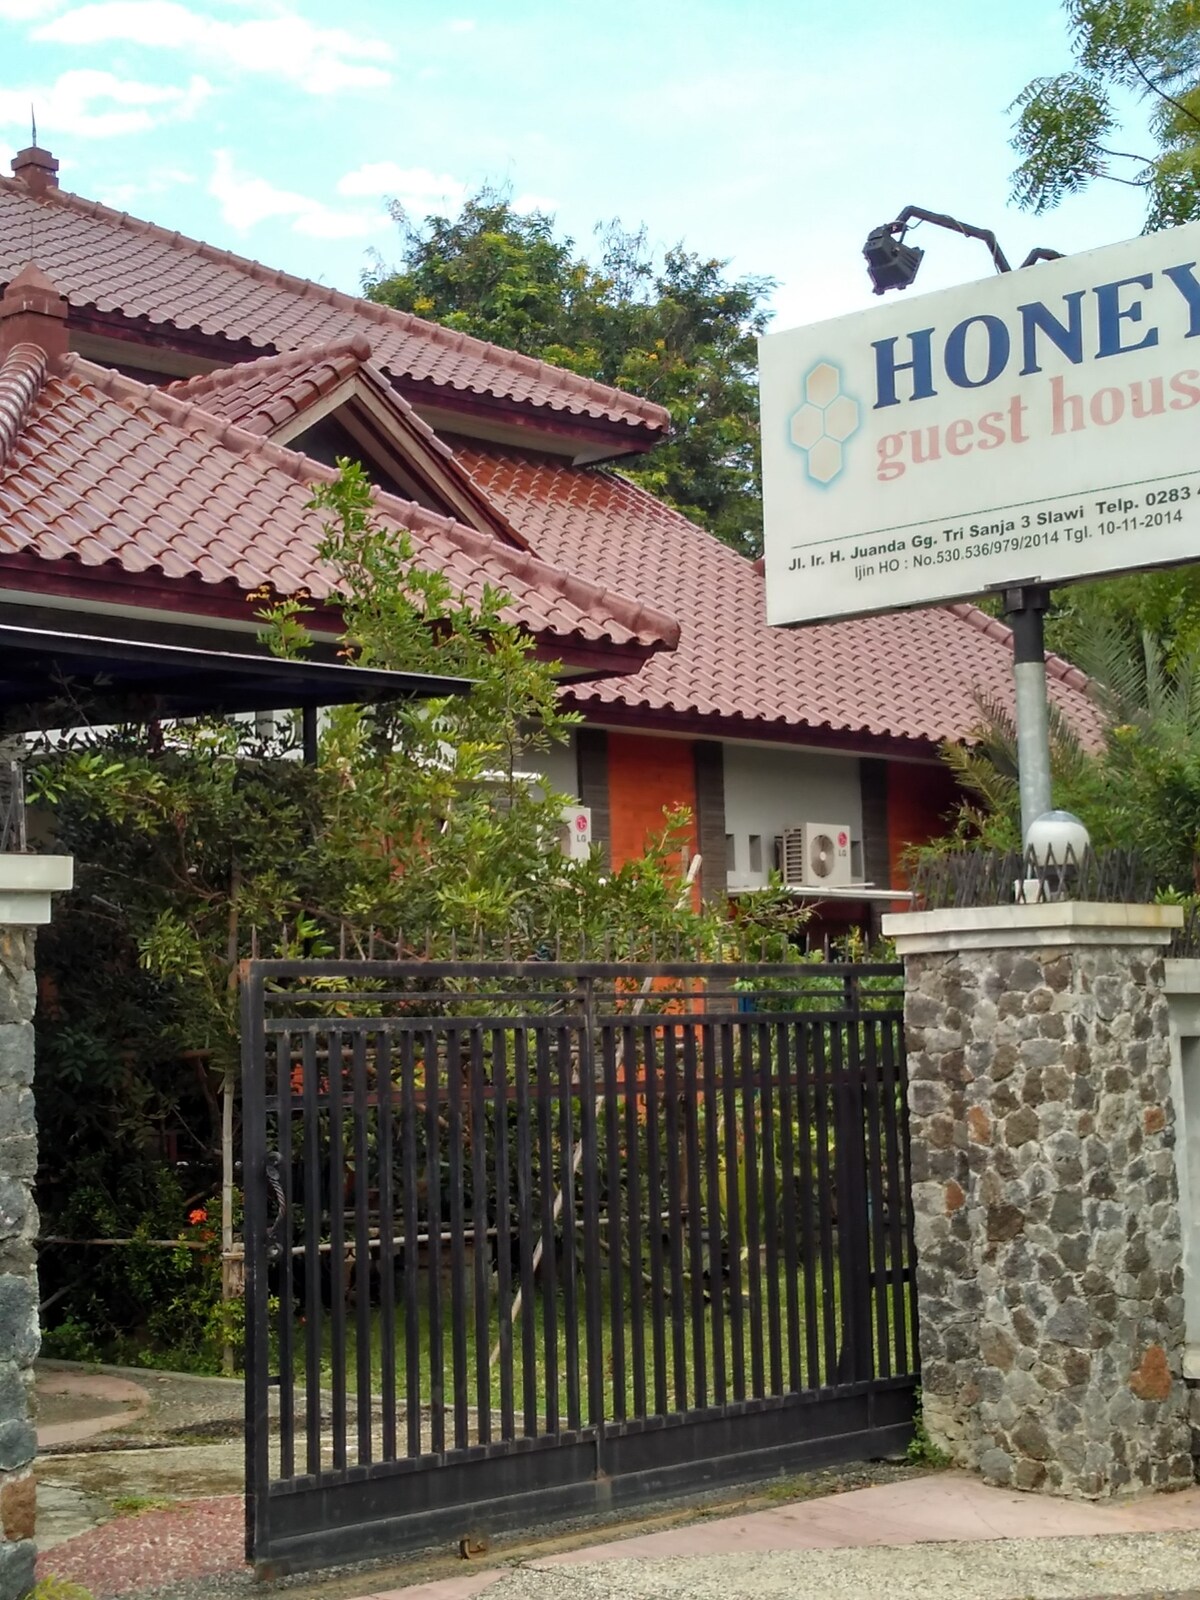 HONEY GUESTHOUSE